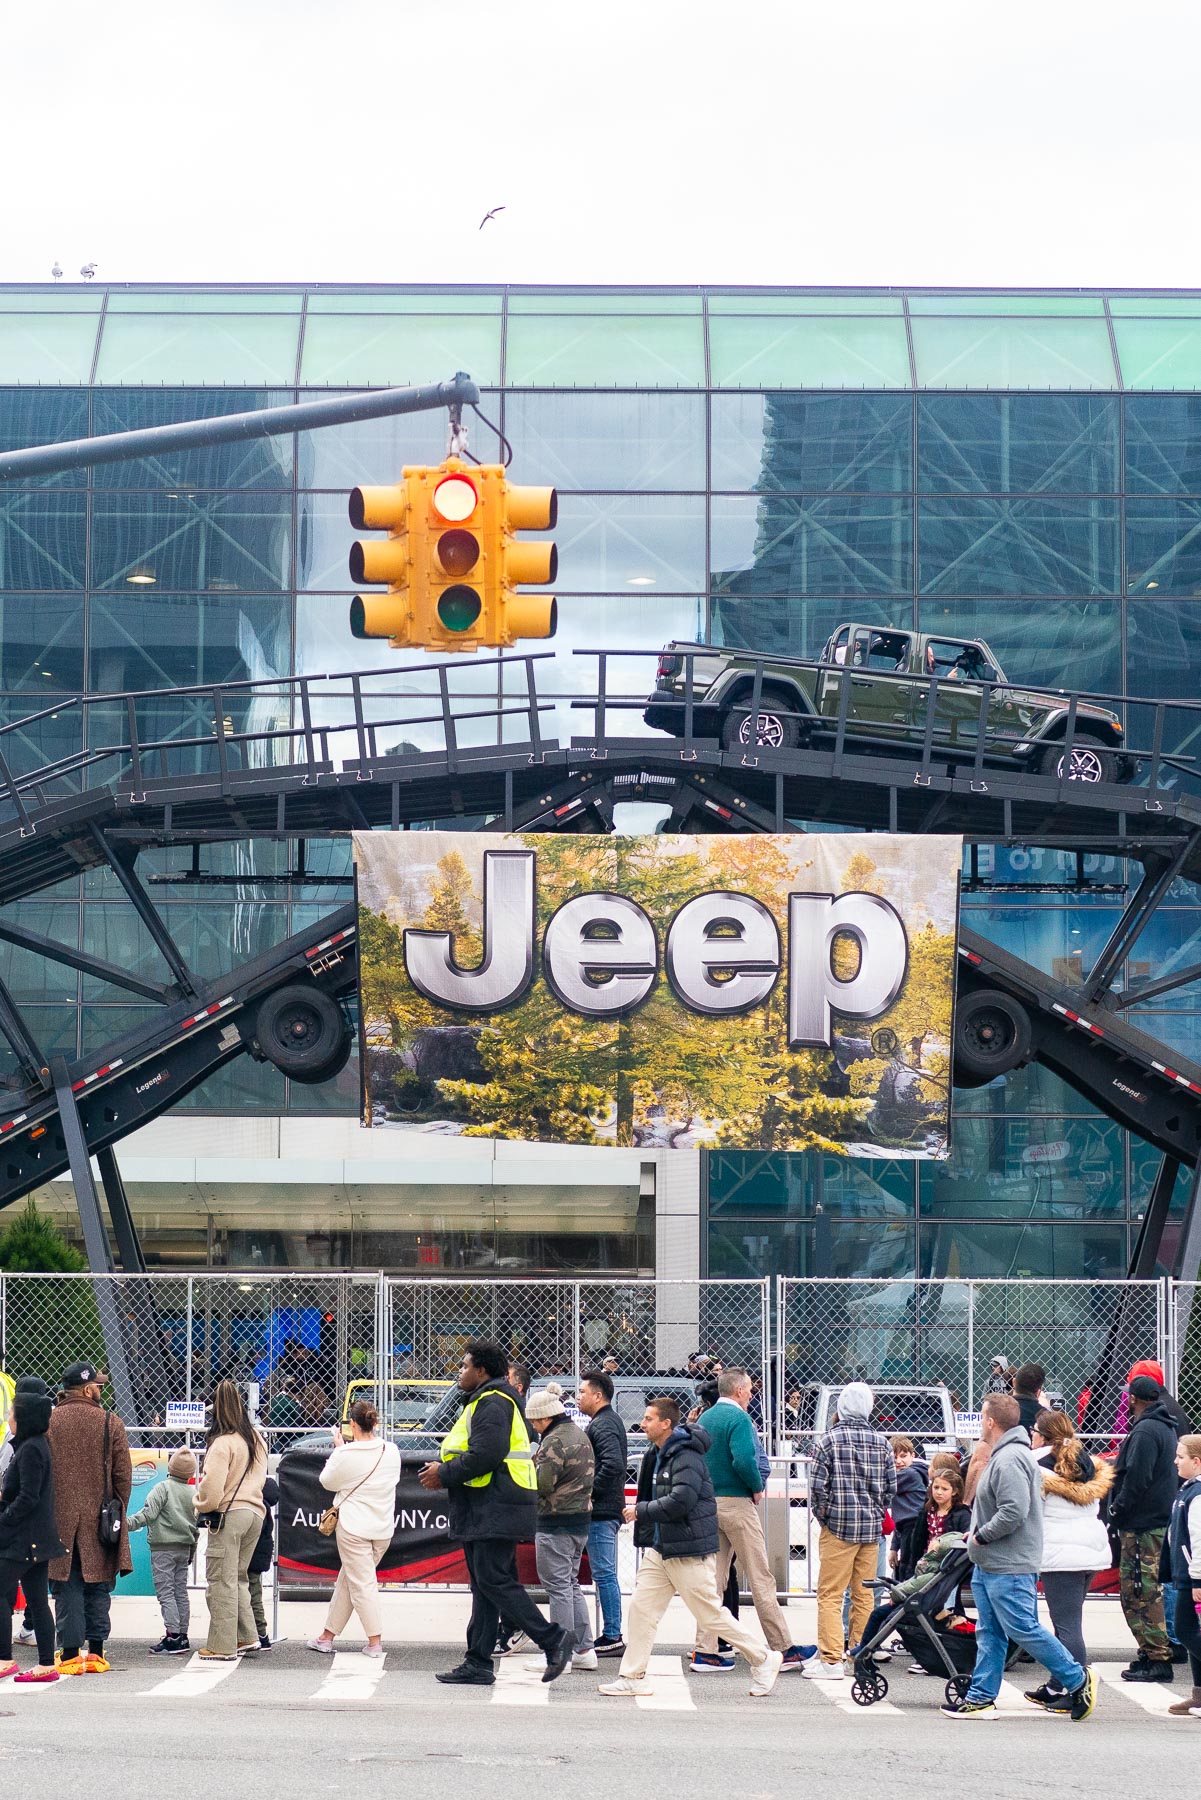 A line outside of Jacob Javits Convention Center for the New York International Auto Show as a Jeep truck drives through an elevated obstacle course in the background